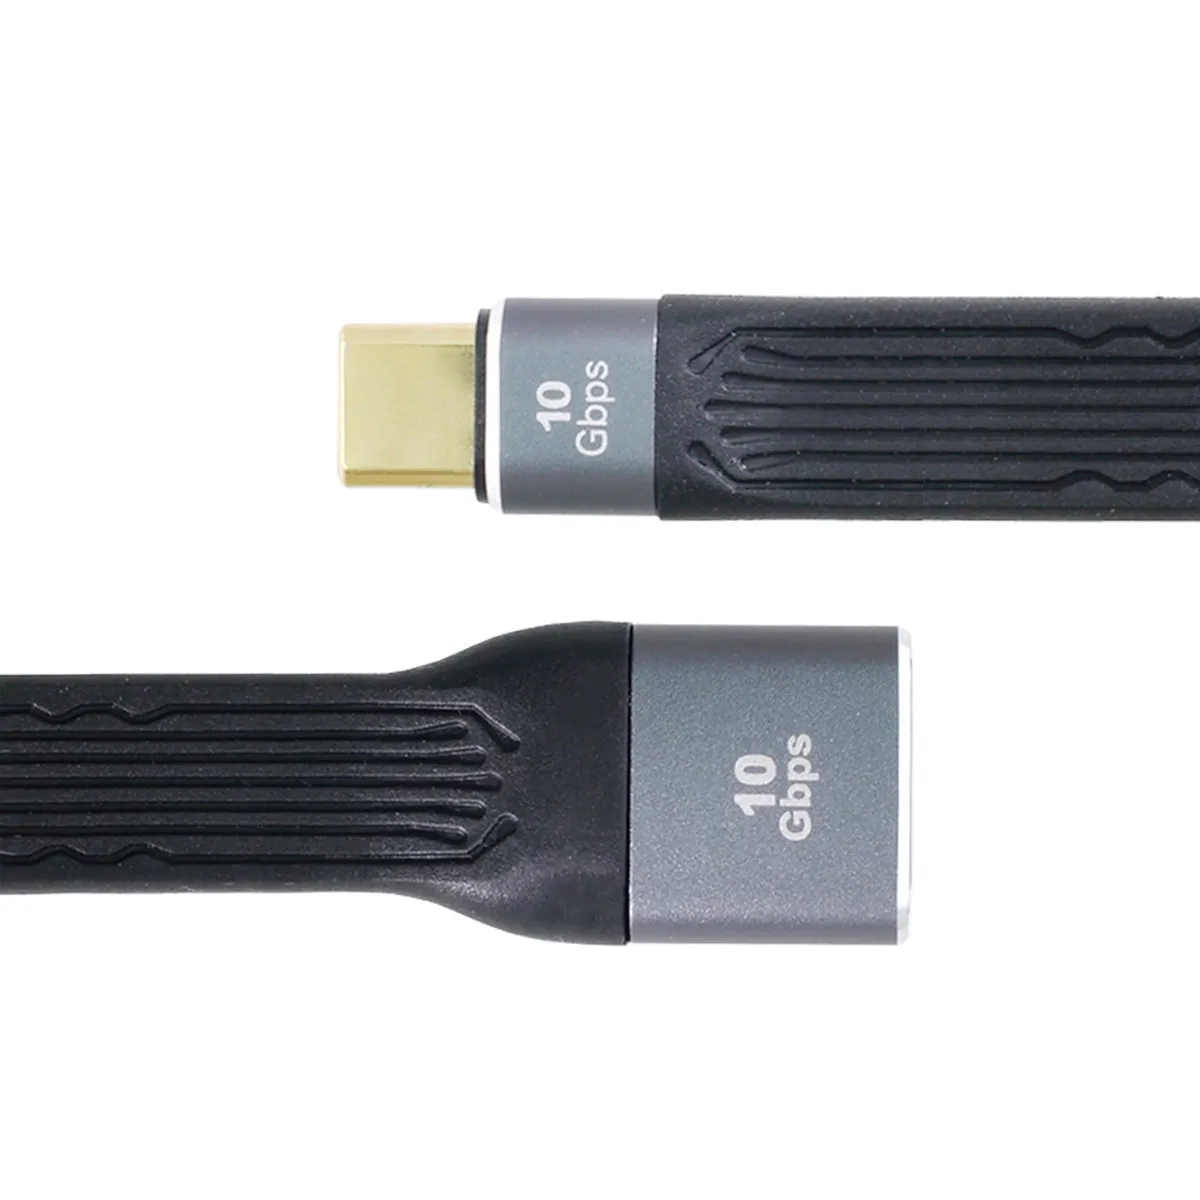 

USB3.0 Type A Female OTG to USB 3.1 Type C Male Host Flat Slim FPC Data Cable for Laptop & Phone